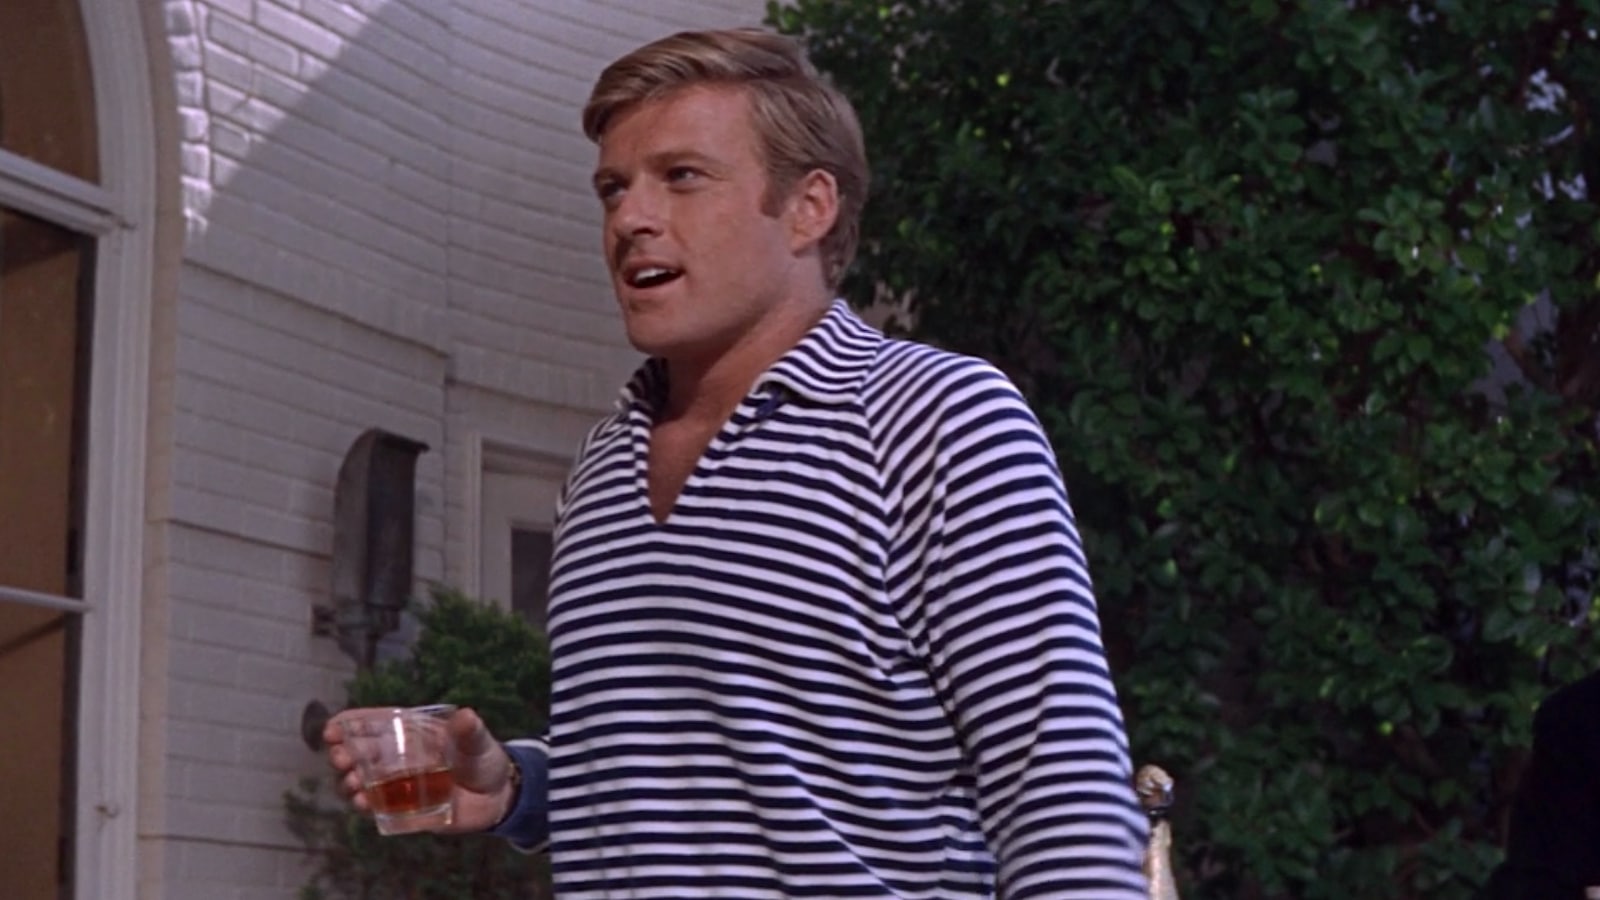 <p><em>War Hunt</em> received acclaim from audiences and critics. But the Robert Mulligan-directed <em>Inside Daisy Clover</em> made Robert Redford a name to remember, thanks to his Golden Globe-winning performance as a bisexual man who marries the titular character, played by Natalie Wood.<em> Inside Daisy Clover</em> flopped at the box office at the time and was drubbed by critics, but it has since grown to become a respected, if uneven, part of mid-60s cinema.</p>